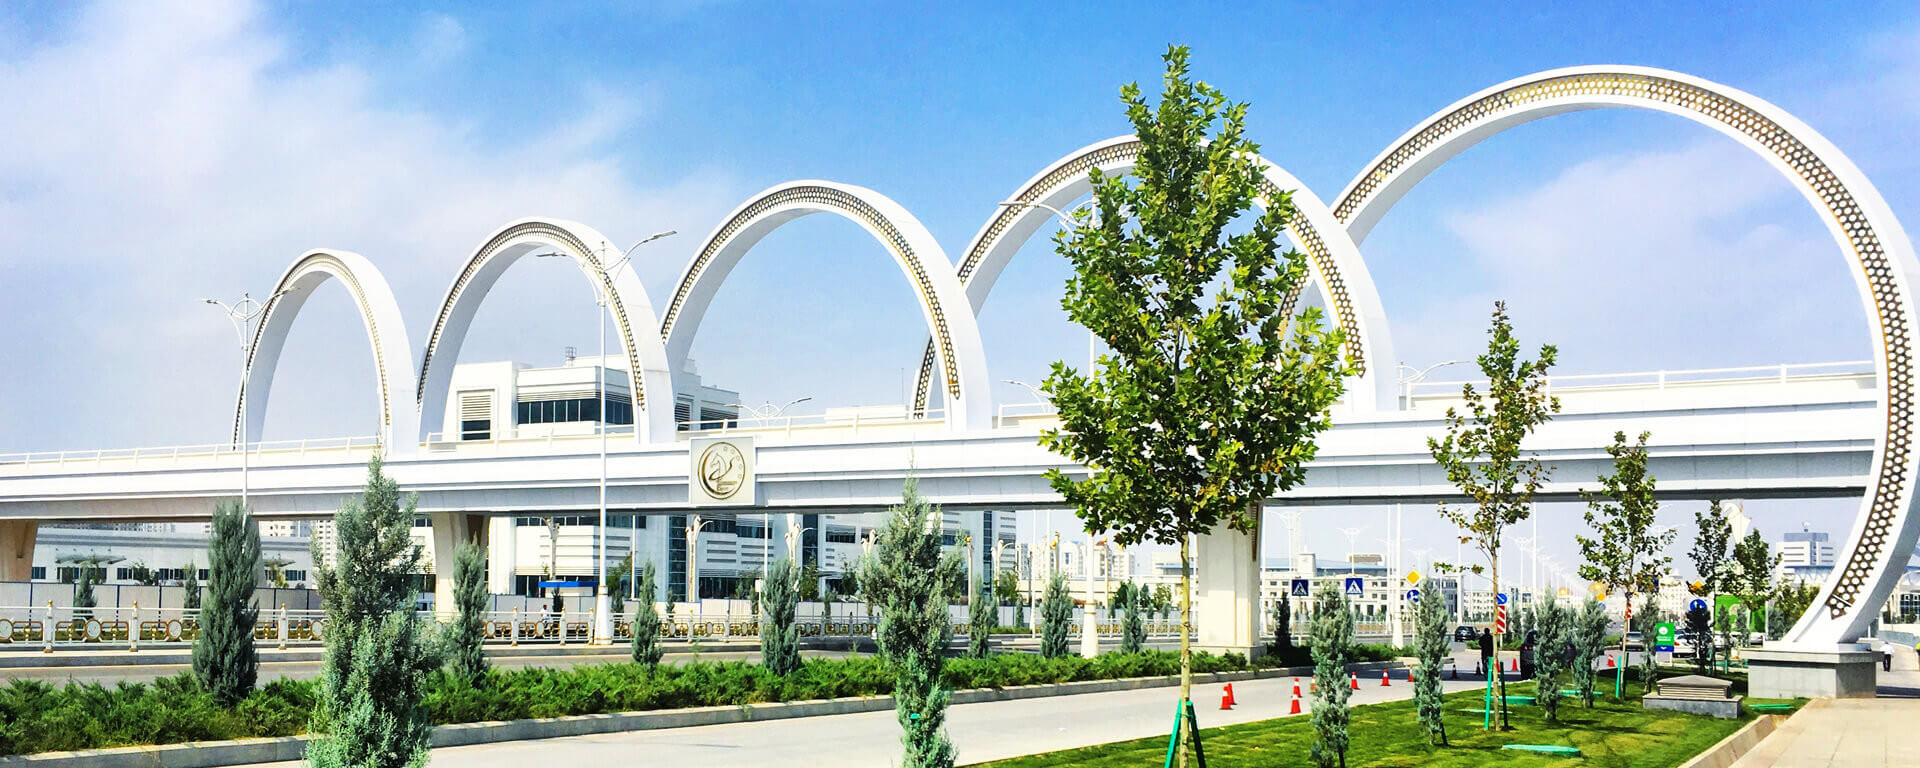 Ashgabat – A white marble wonderland with a backdrop of mountains.